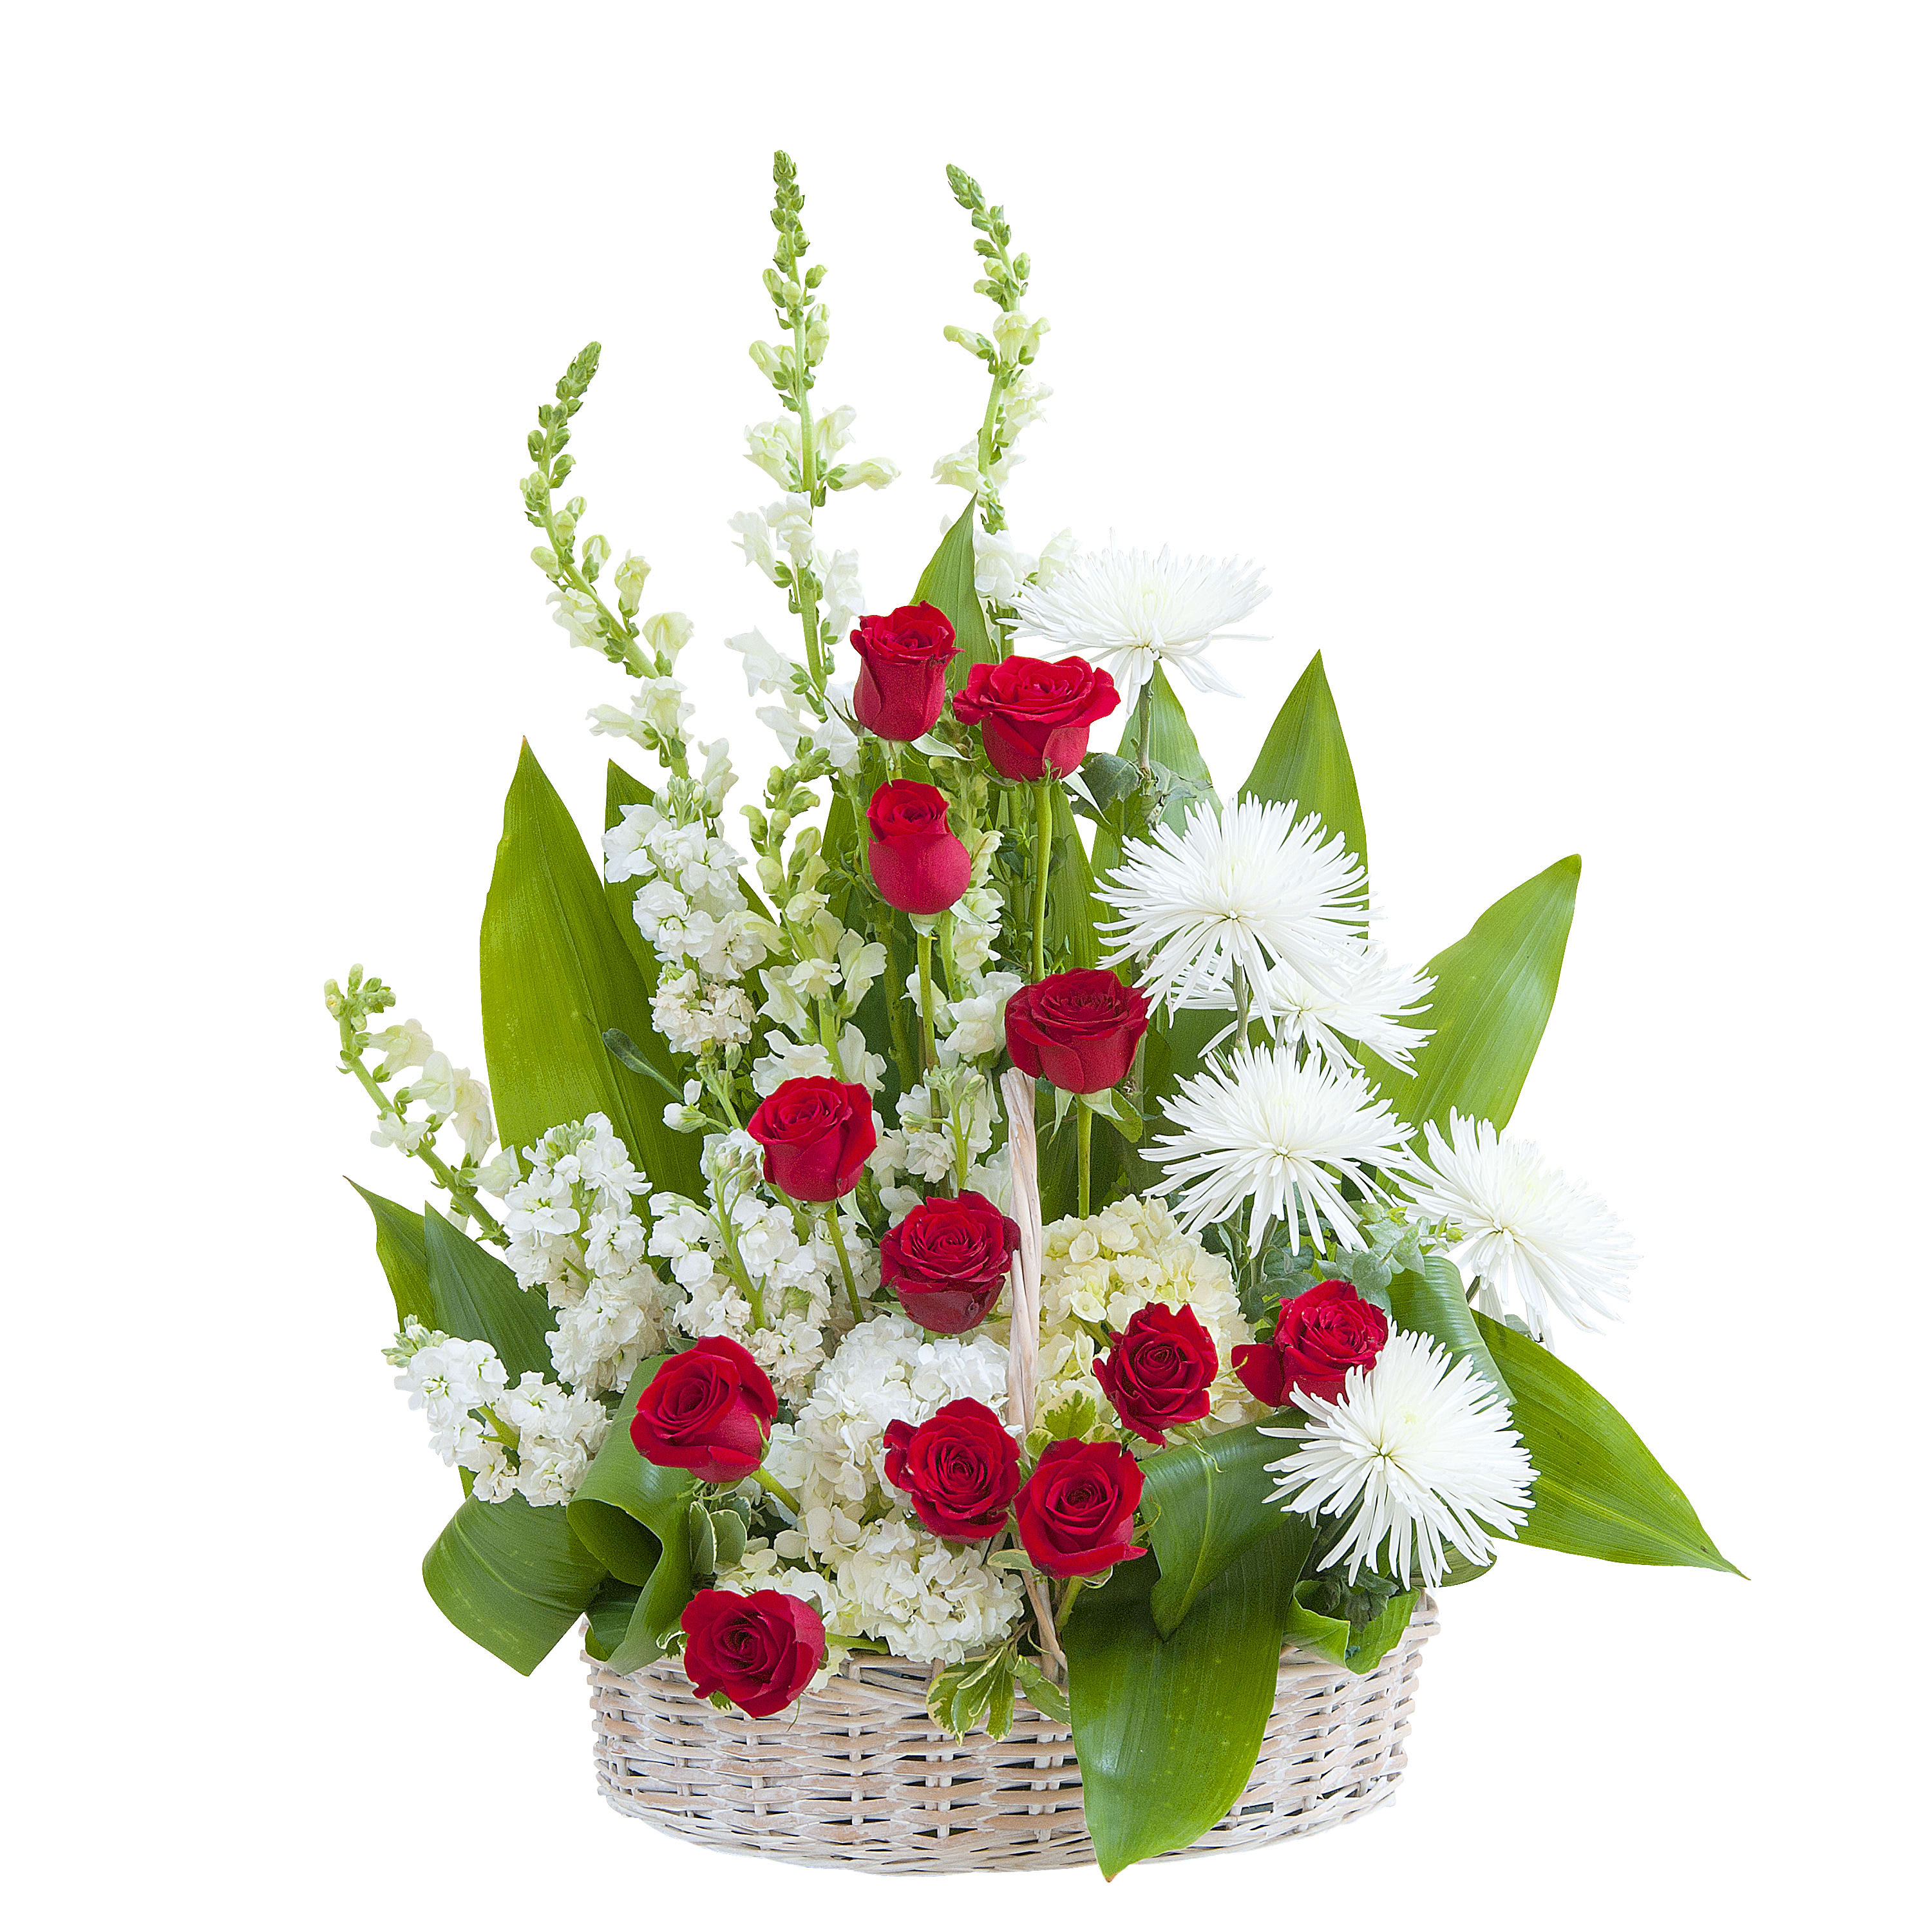 Enduring Strength Basket - A basket filled with a variety of red and white flowers.